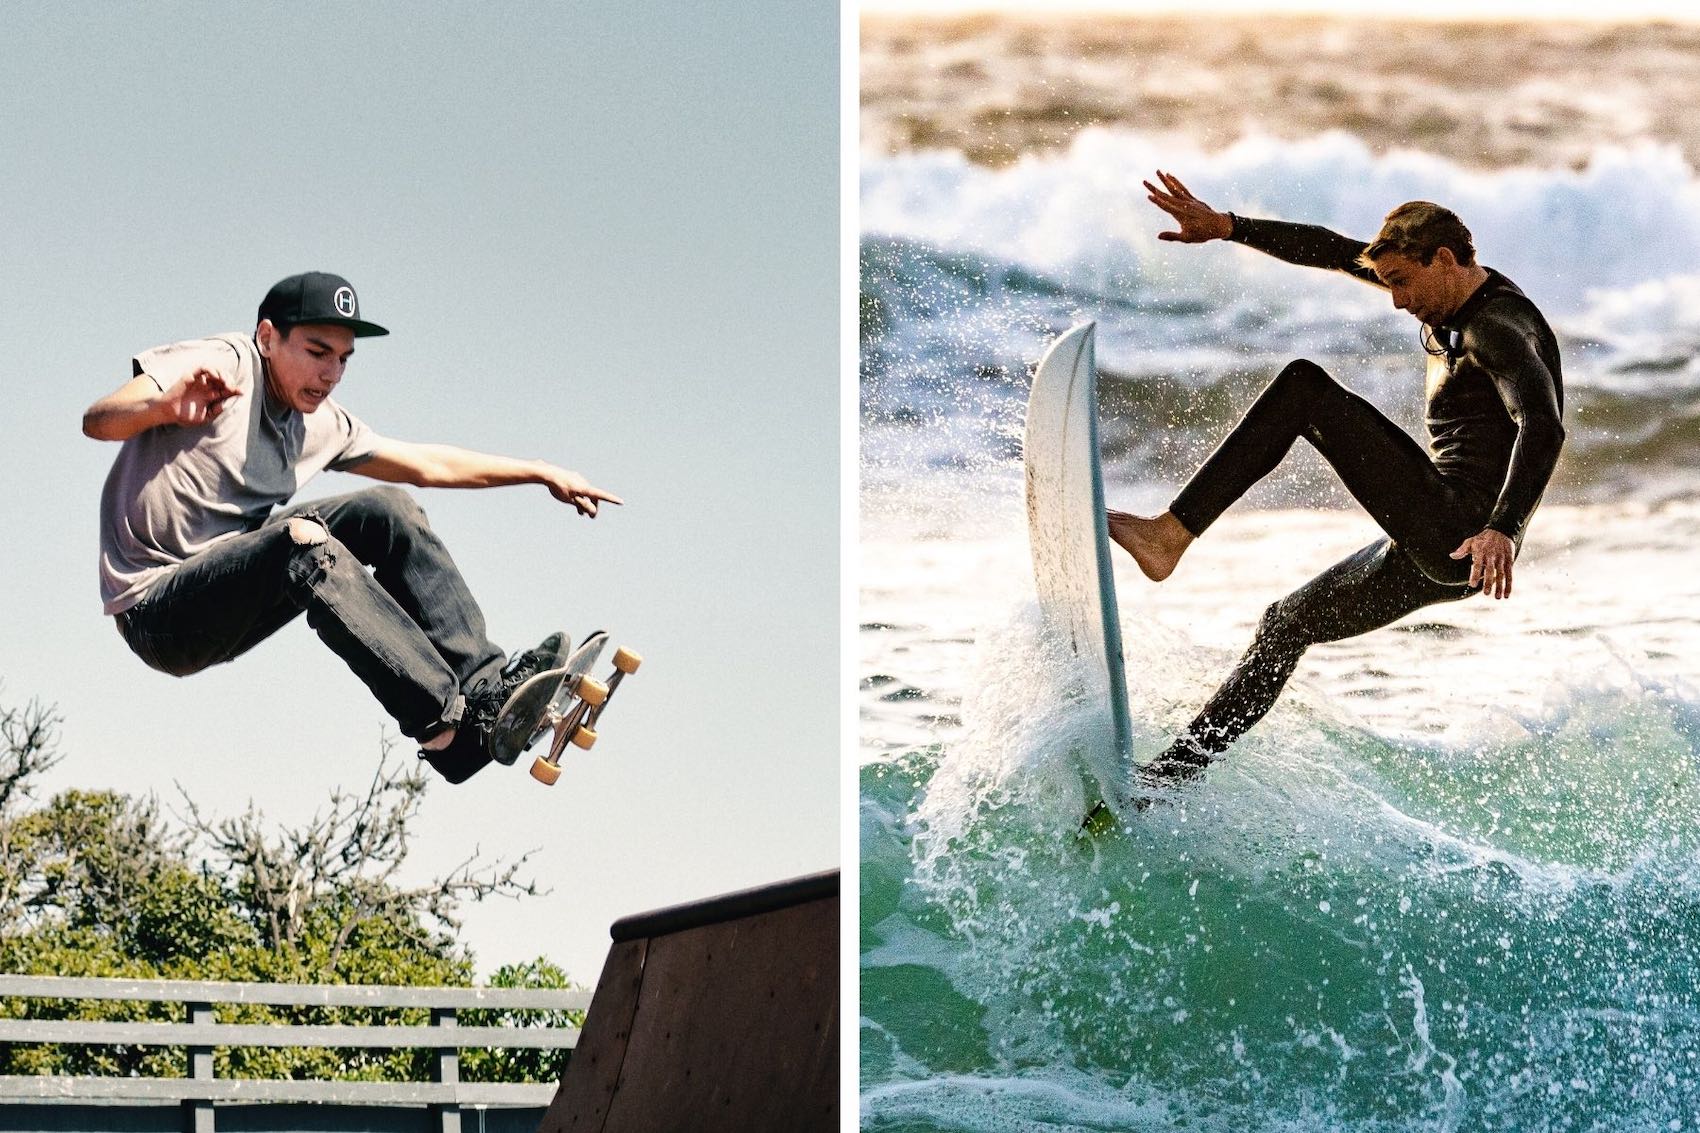 Which Surfd Surfing - Skating: vs. is better?